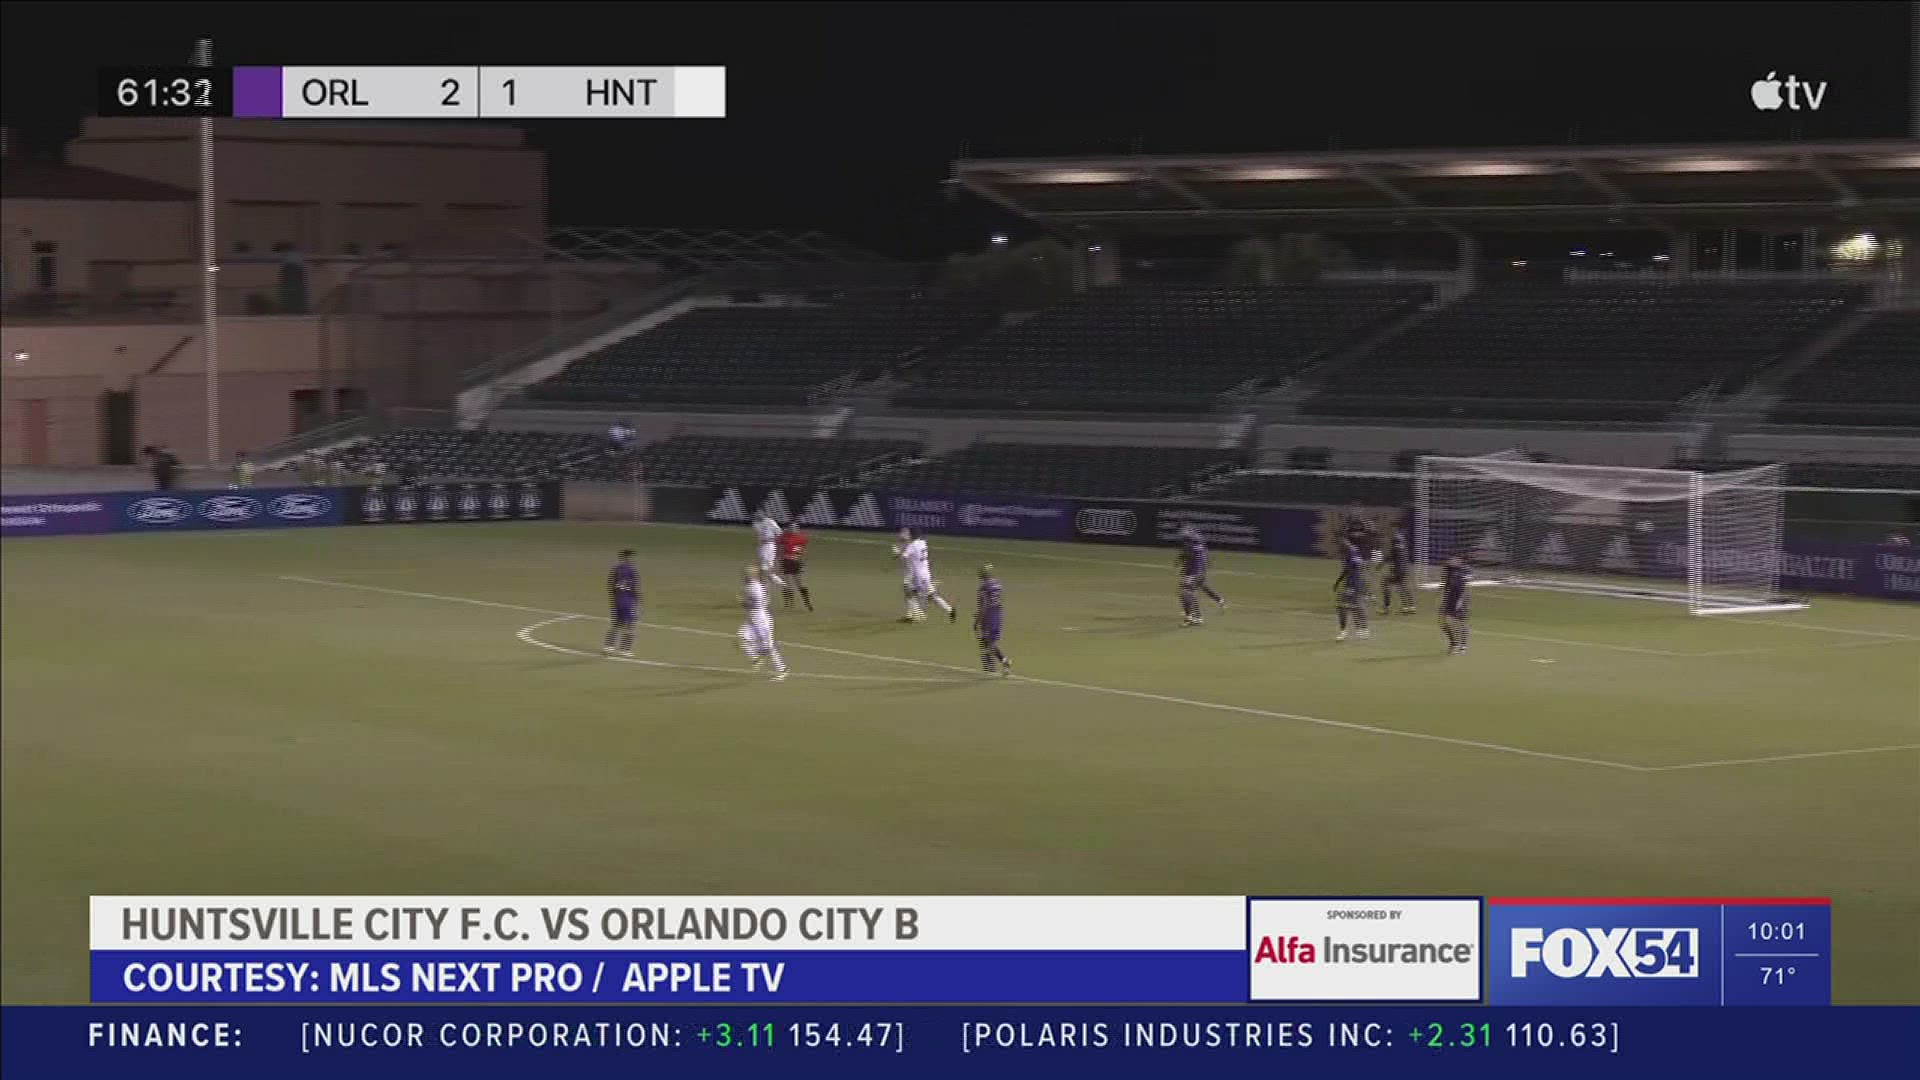 Huntsville City Football Club suffered its first defeat on Friday night, falling 2-1 to Orlando City B despite a sensational goal by Kemy Amiche.